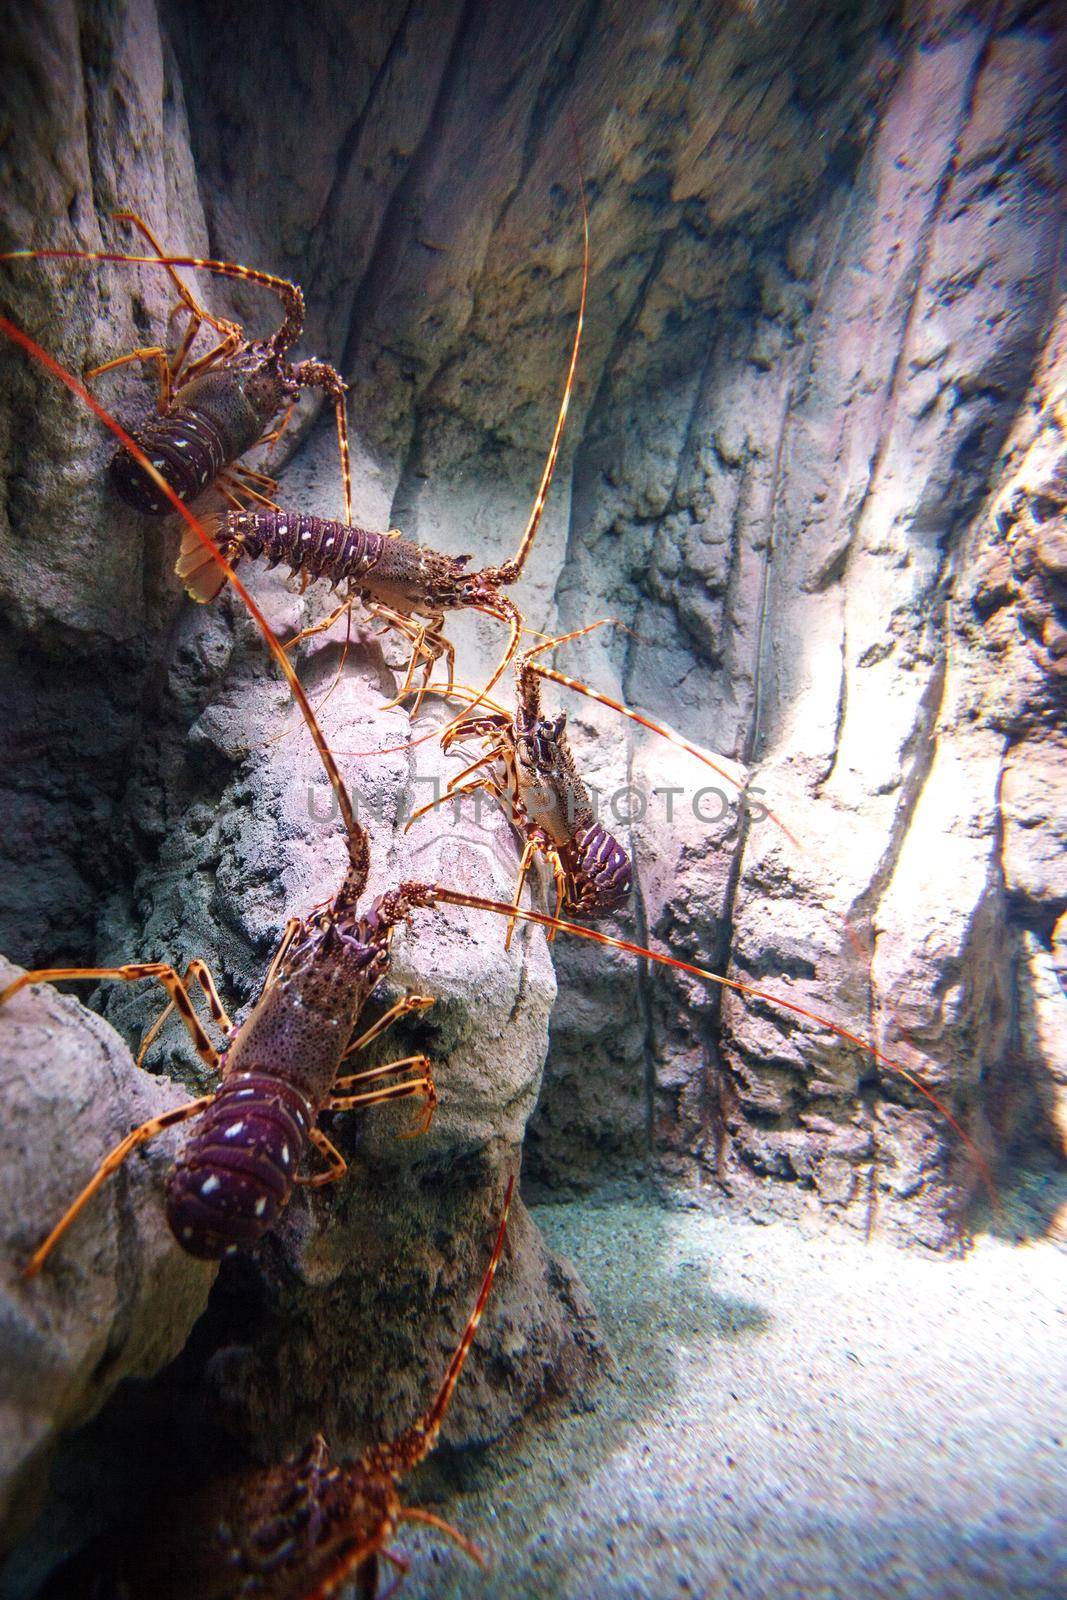 Spiny lobster - Palinurus elephas. Underwater shot of lobster on the ocean bottom floor. These shellfish are common in western Europe